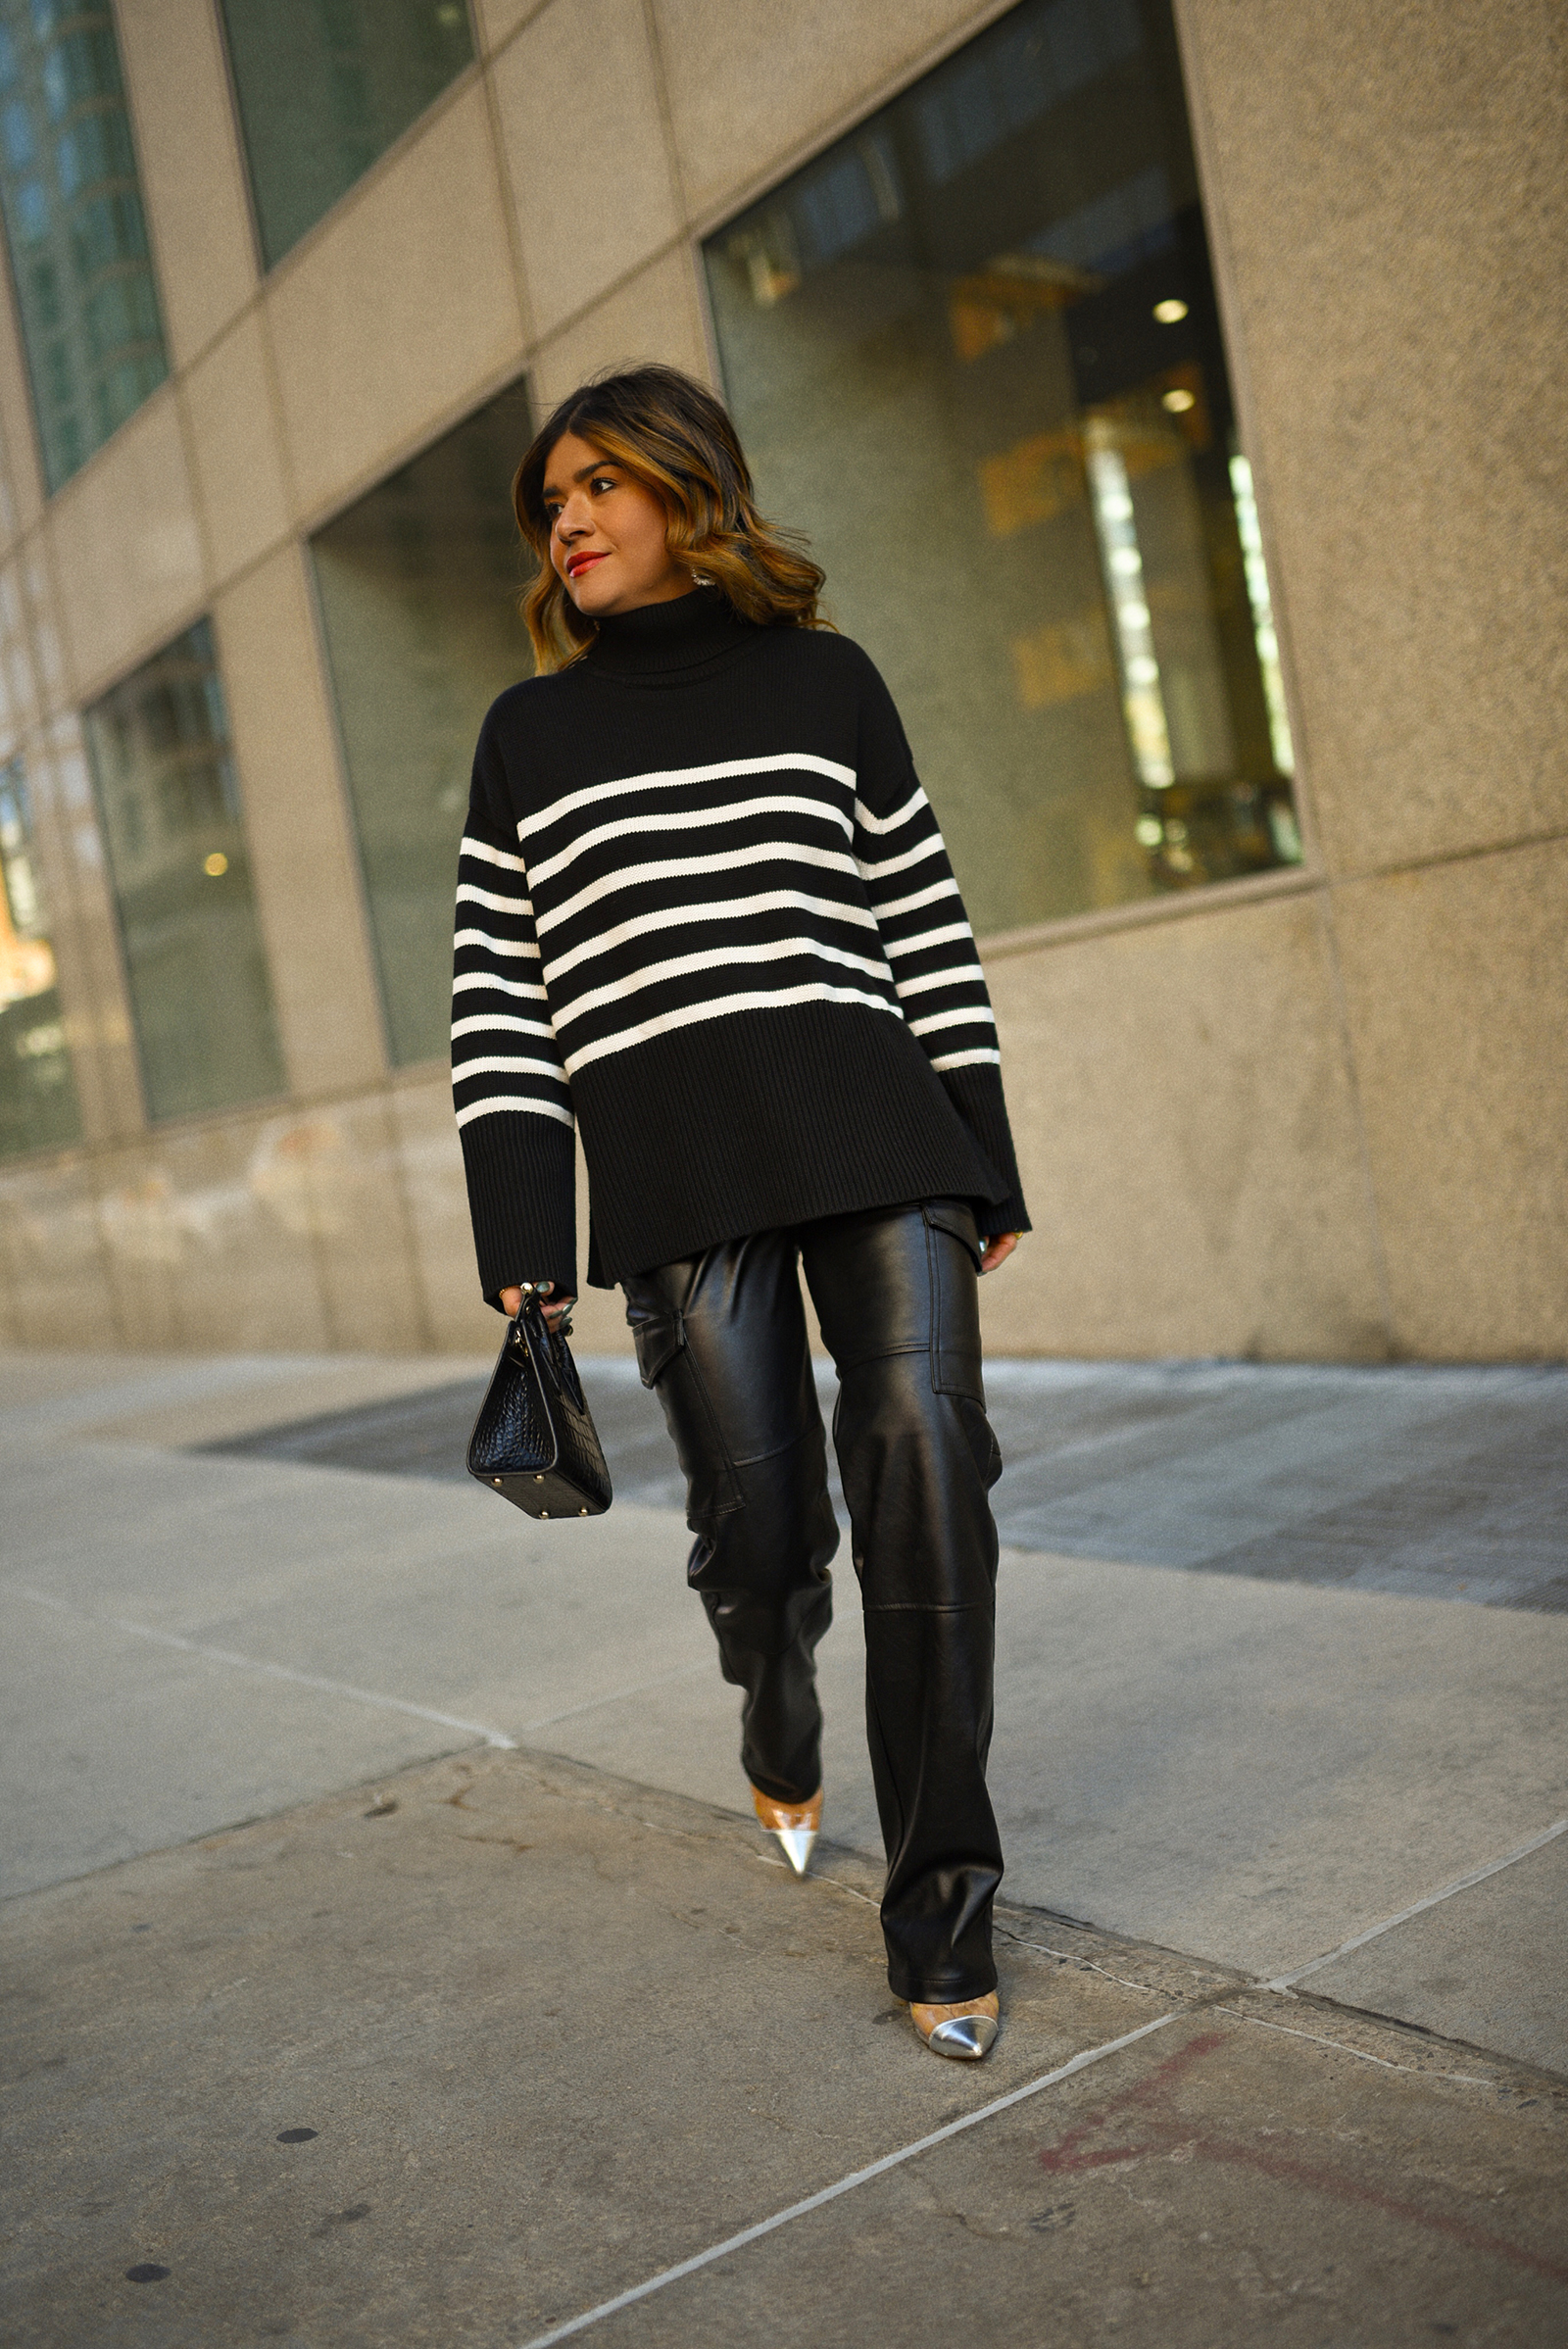 CAROLINA HELLAL OF CHIC TALK WEARING GAP VEGAN LEATHER CARGO PANTS, STRIPPED SWEATER, AVIATOR JACKET, SILVER PUMPS AND STRATHBERRY LEATHER HANDBAG